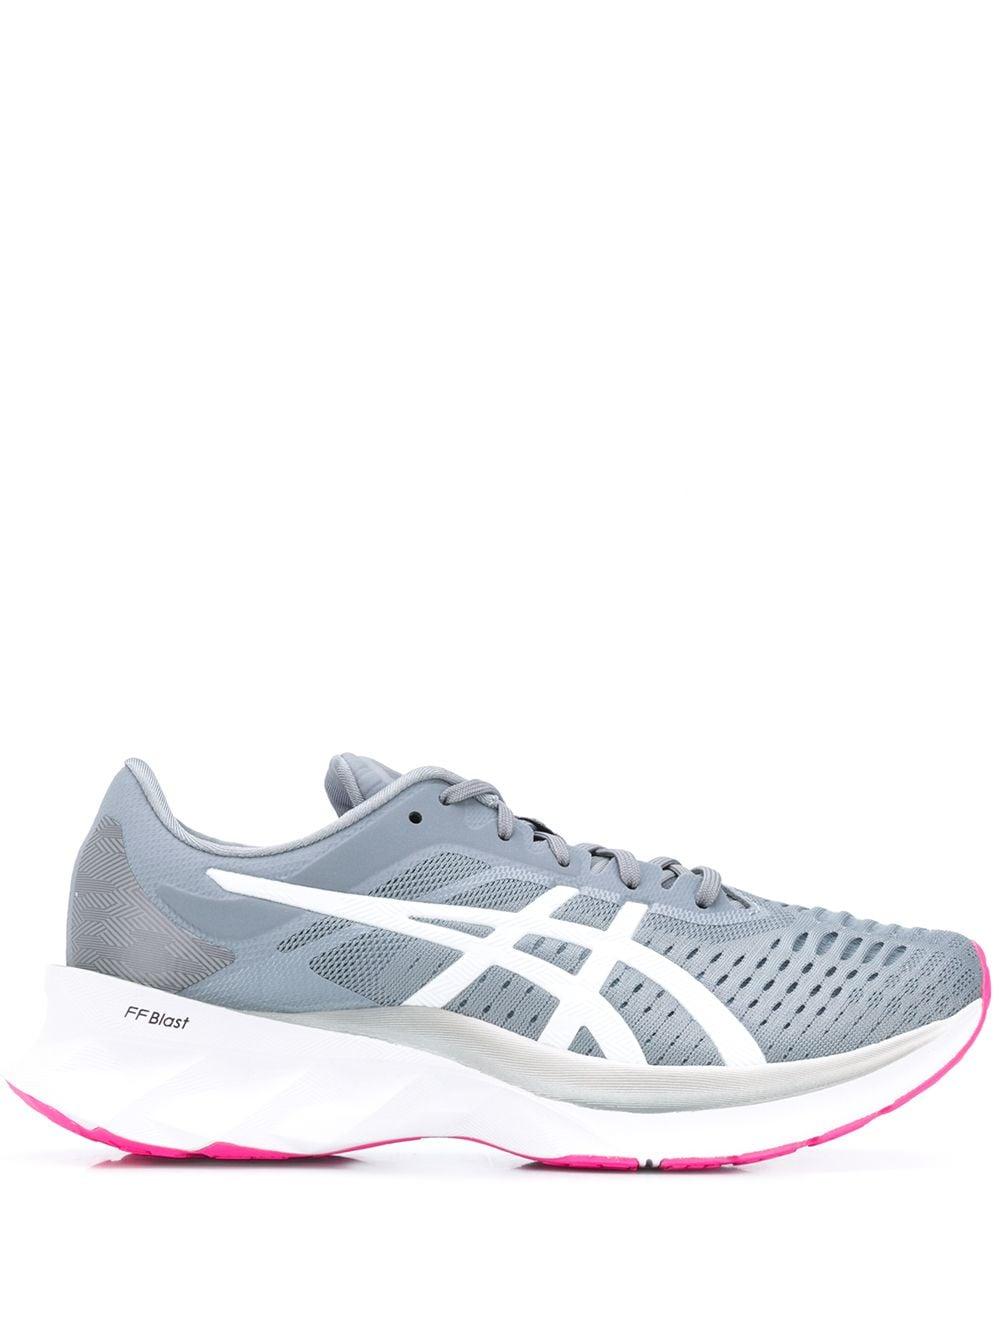 Asics Synthetic Lifestyle Gel-lyte Runner Trainers in Grey (Gray) - Save  79% - Lyst